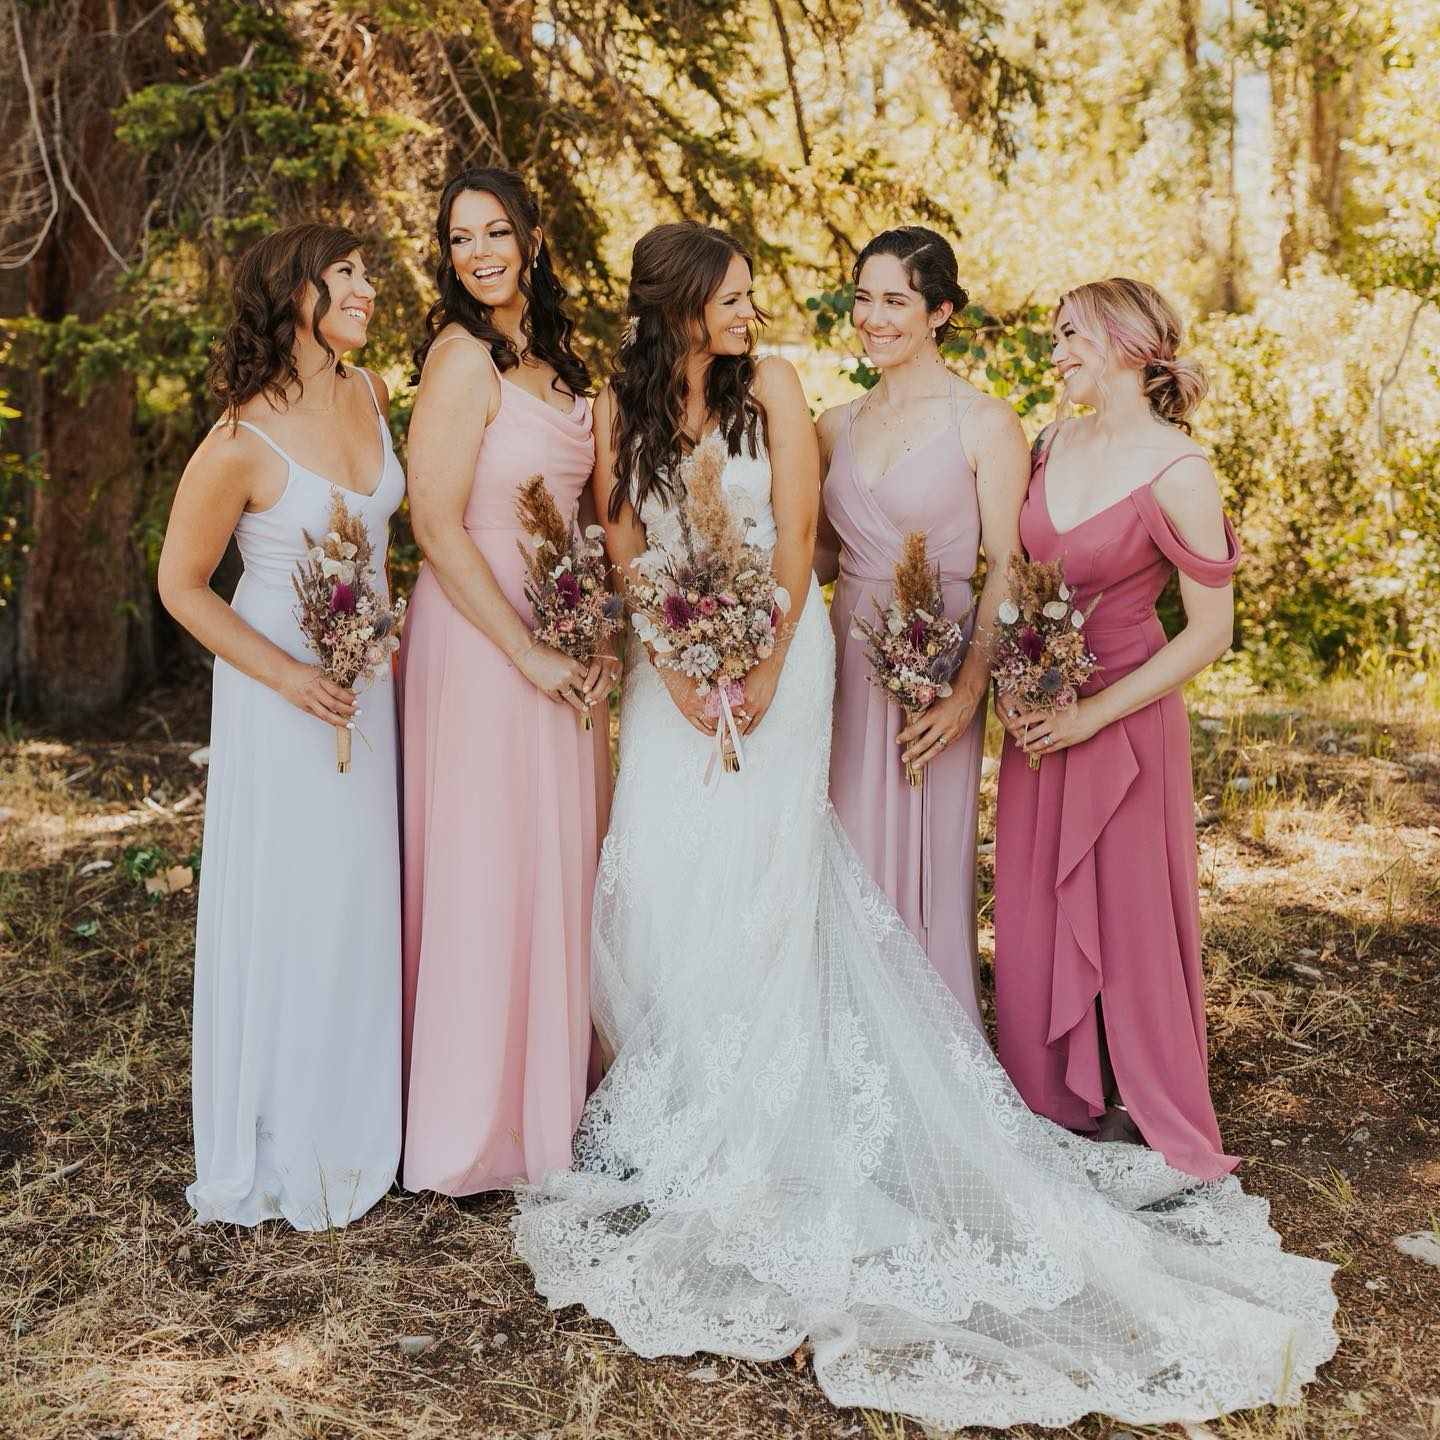 How To Customize, Refresh and Upcycle Mismatched Bridesmaid Dresses with  Rit Dye ⋆ Ruffled